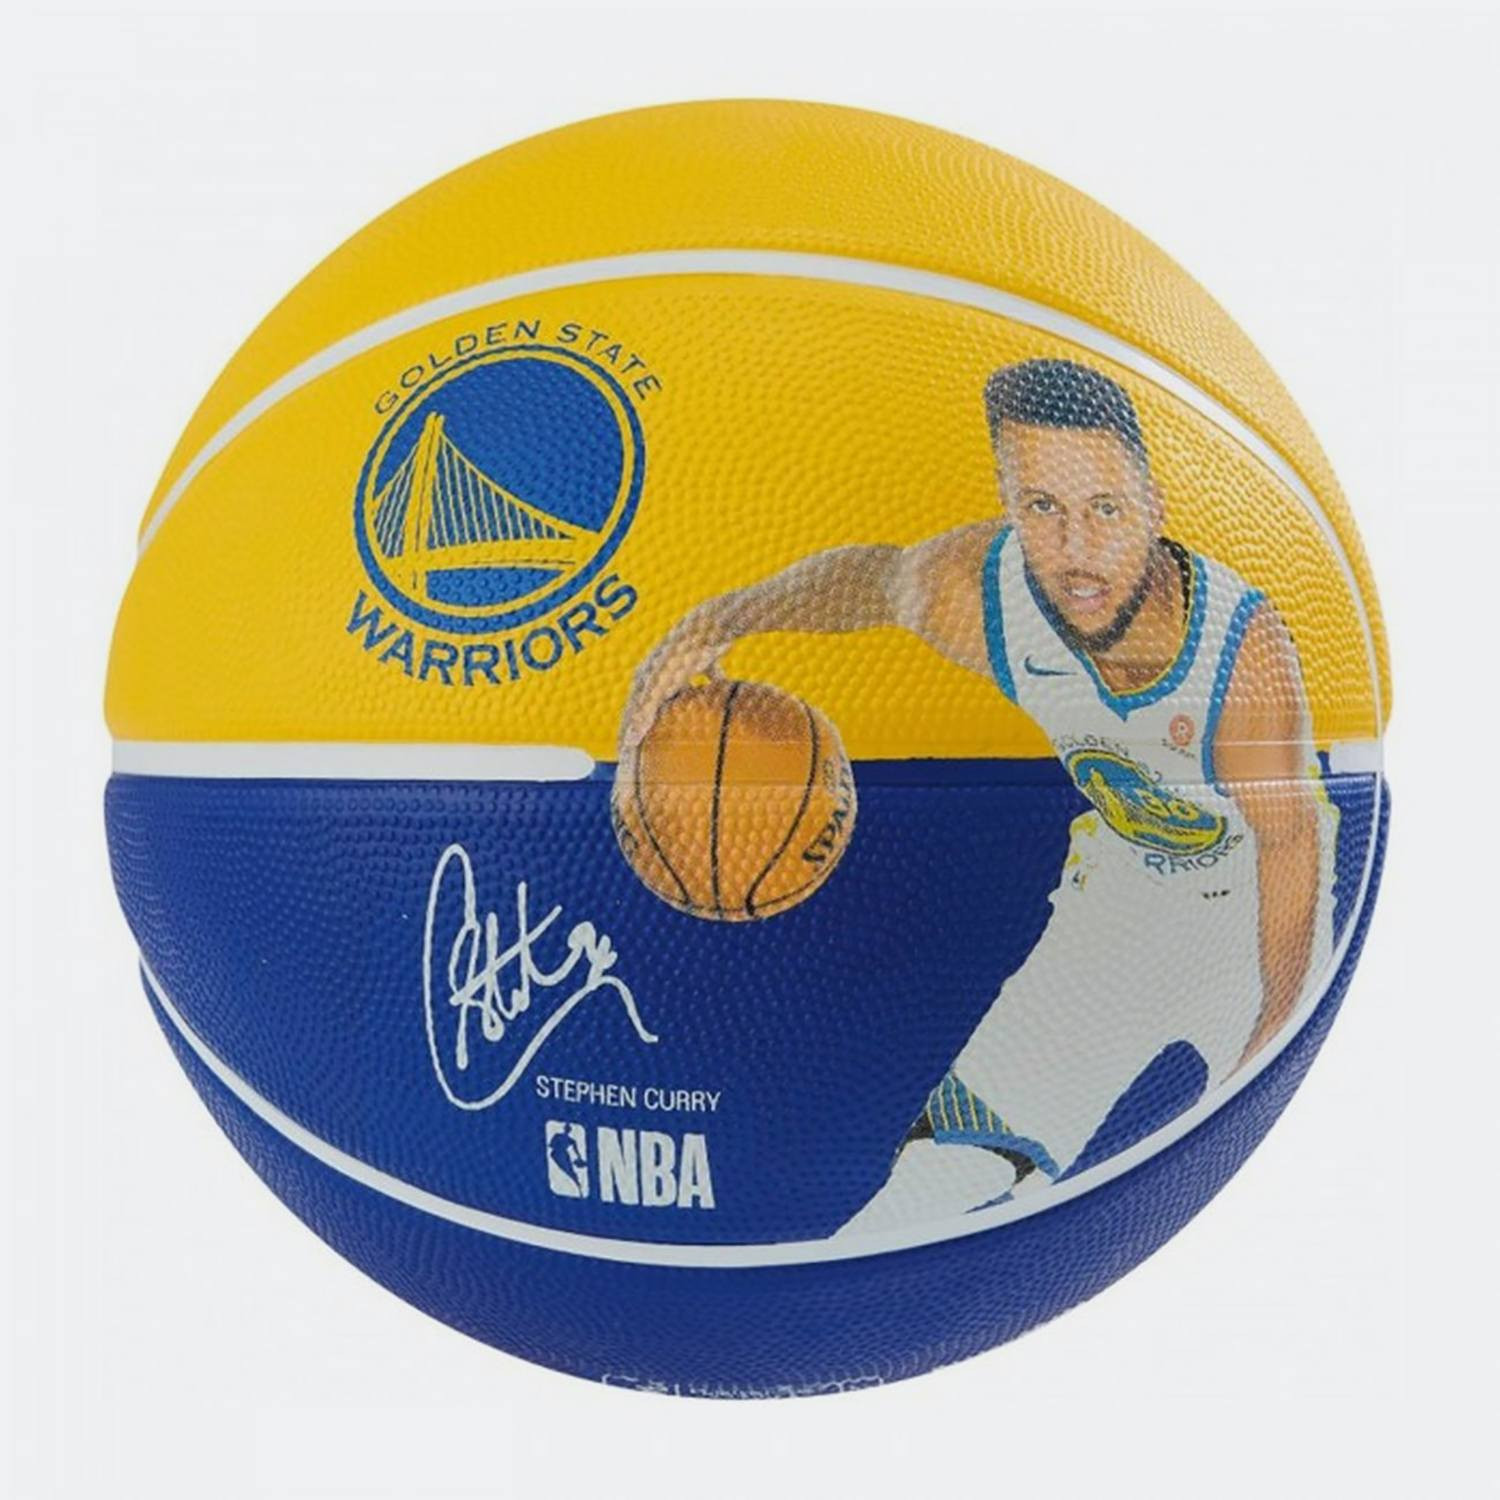 Spalding New Nba Player Warriors Curry No. 7 (9000030083_8576)